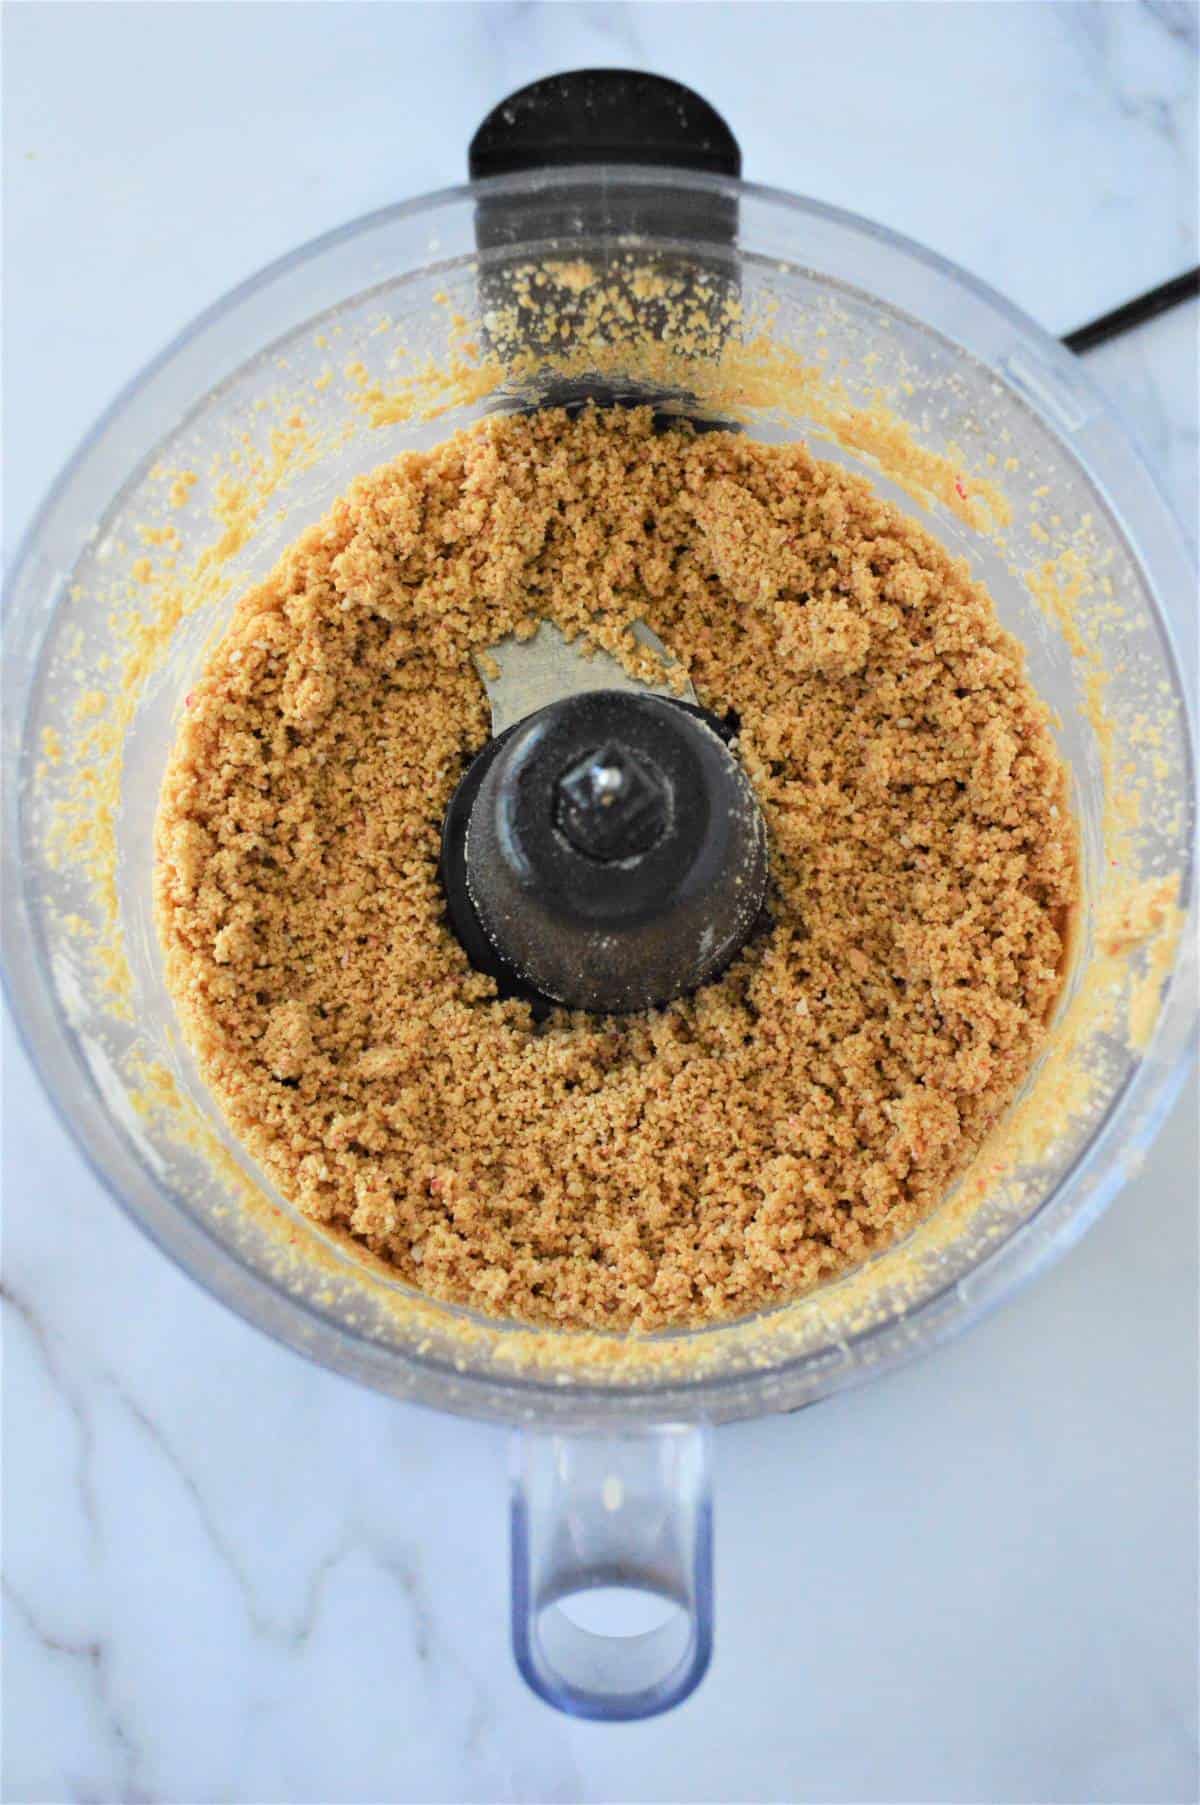 A food processor filled with a mixture of protein-rich ingredients for making Protein Balls.